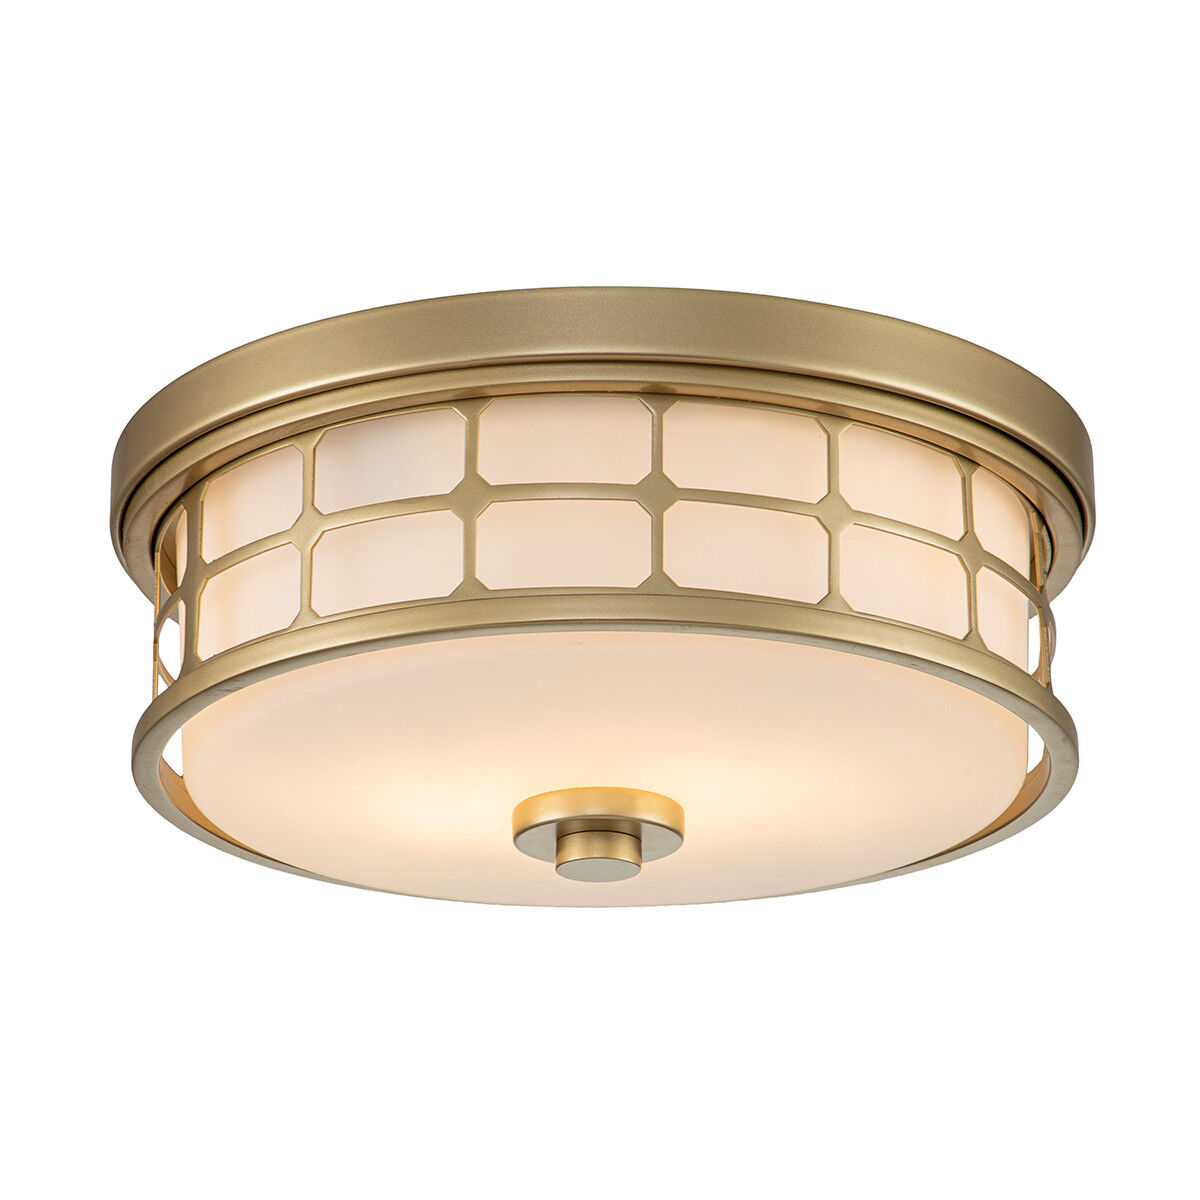 Elstead Lighting Quoizel Guardian Cylindrical Ceiling Light Painted Natural Brass, IP44